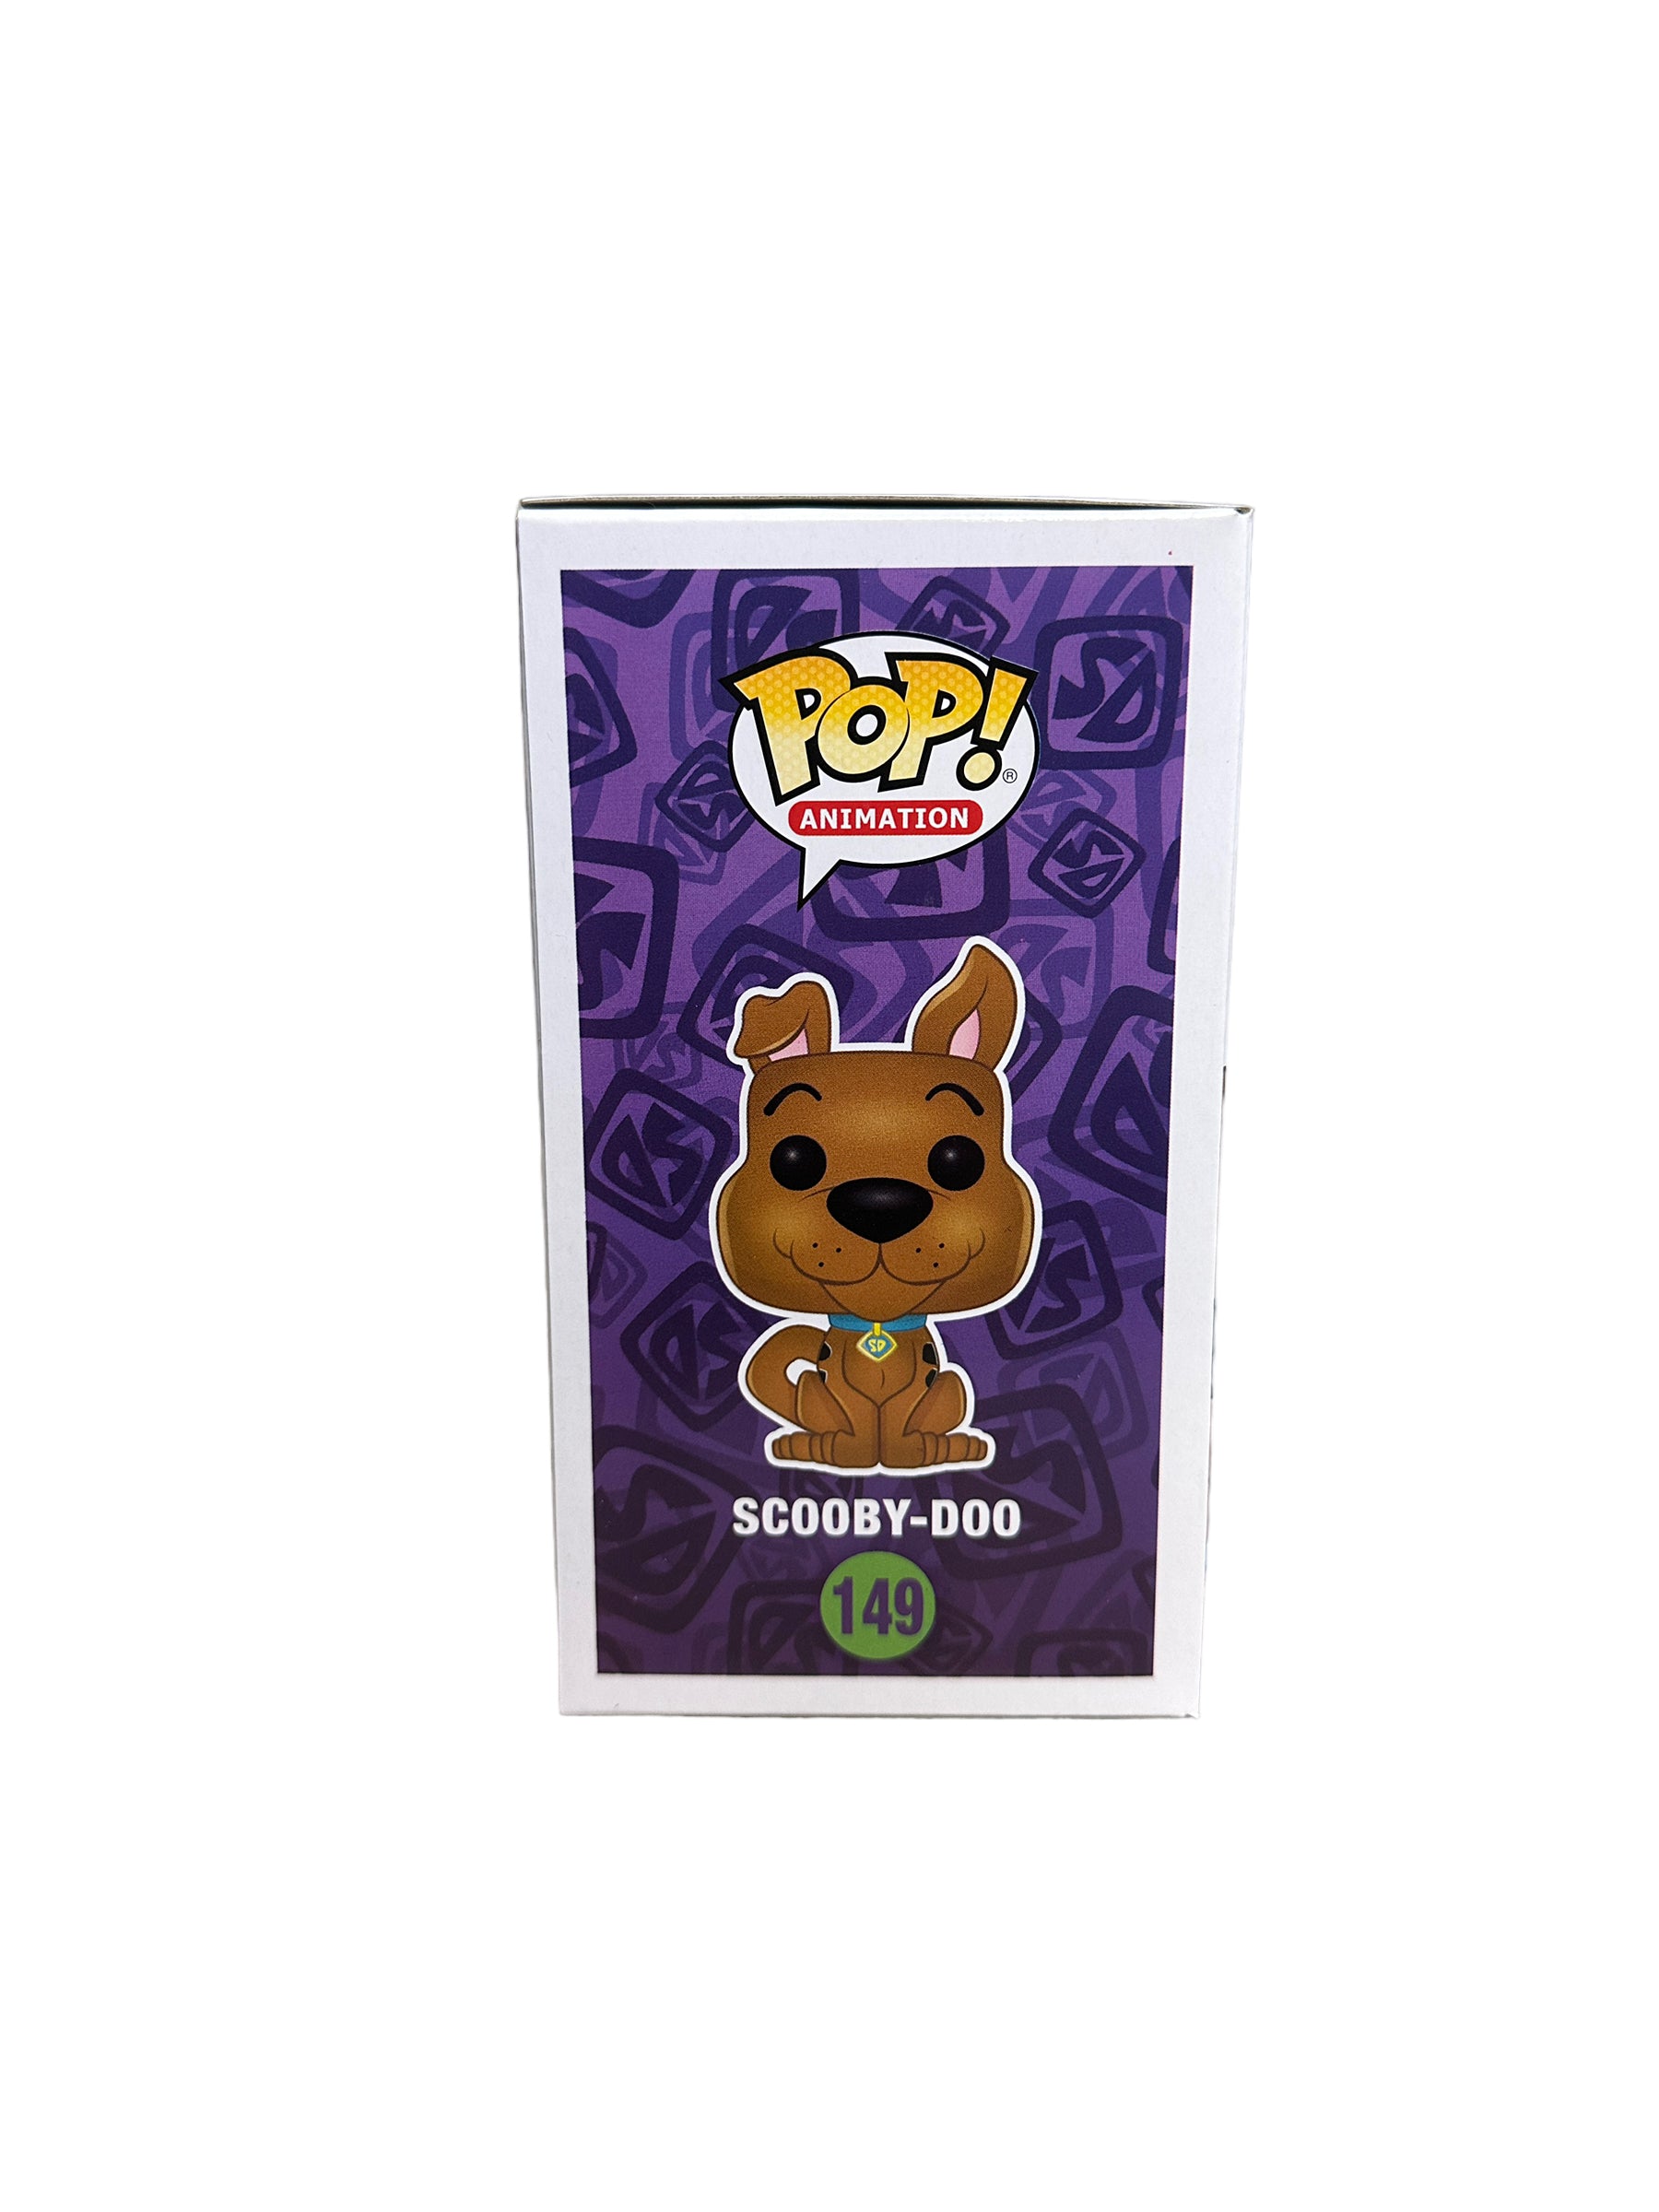 Scooby-Doo #149 (Pink Flocked) Funko Pop! - Scooby-Doo - SDCC 2017 Saturday Morning Cartoons Exclusive LE1000 Pcs - Condition 8.75/10